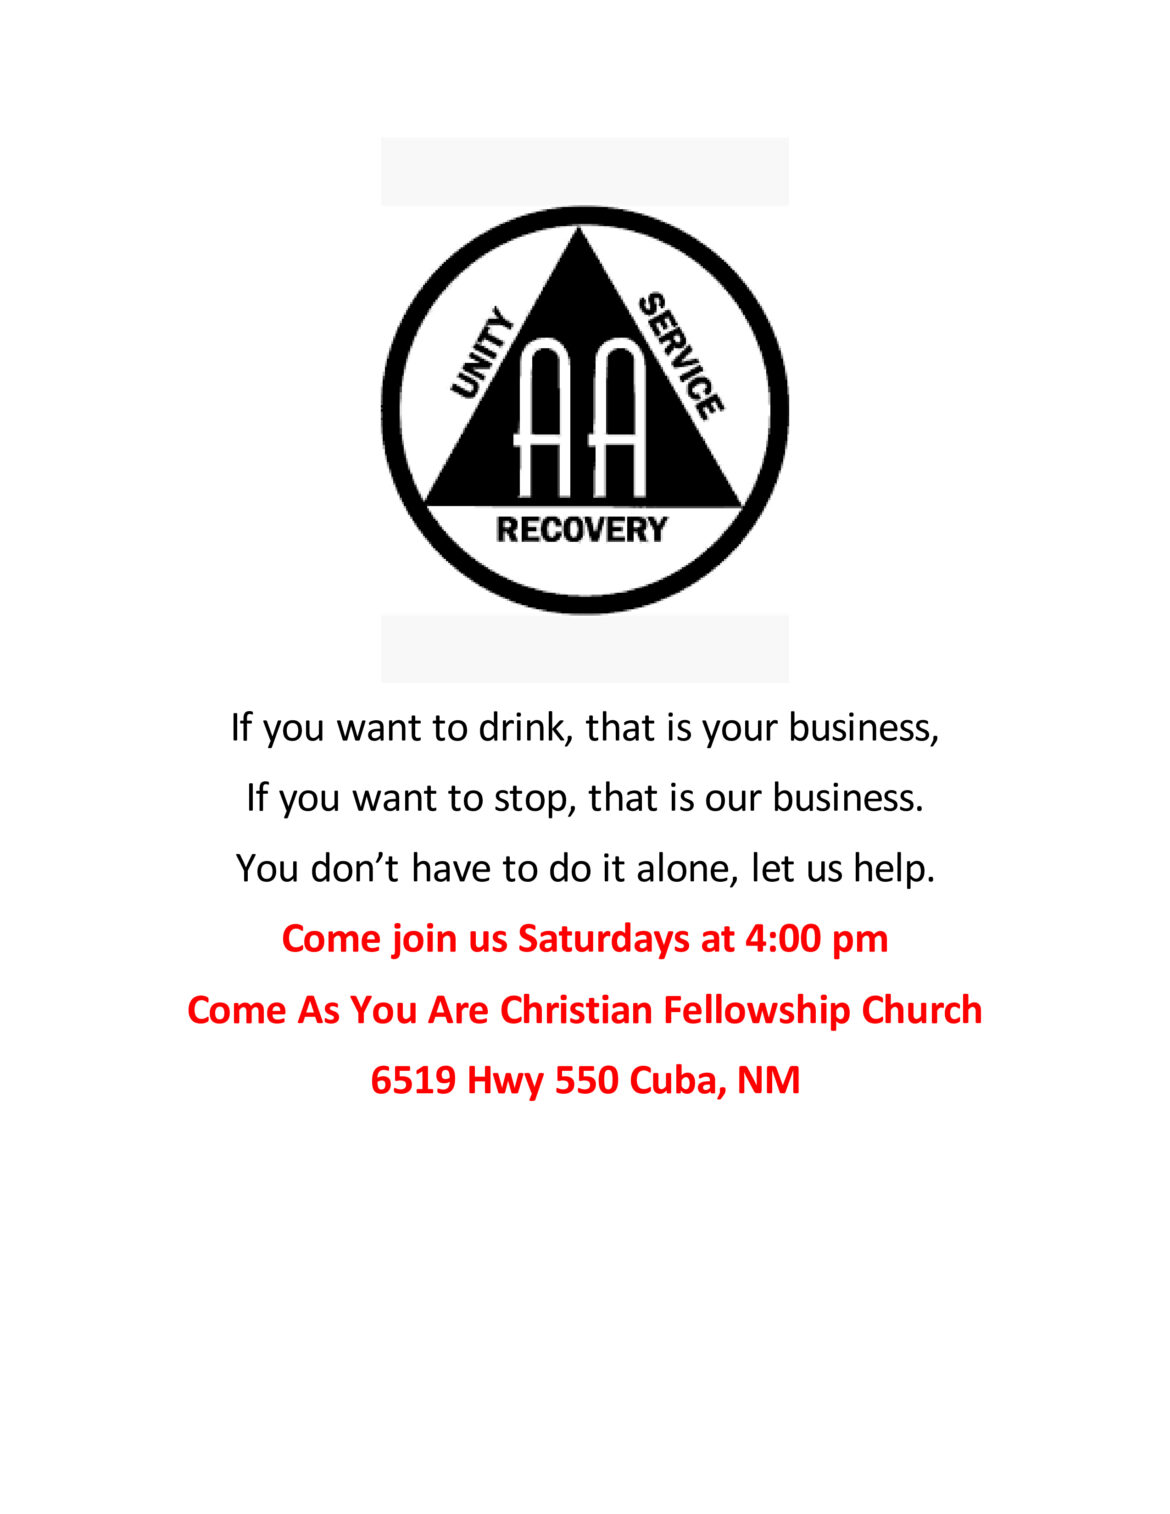 AA Fellowship – Come Join Us, Saturdays at 4:00 pm, Cuba, NM